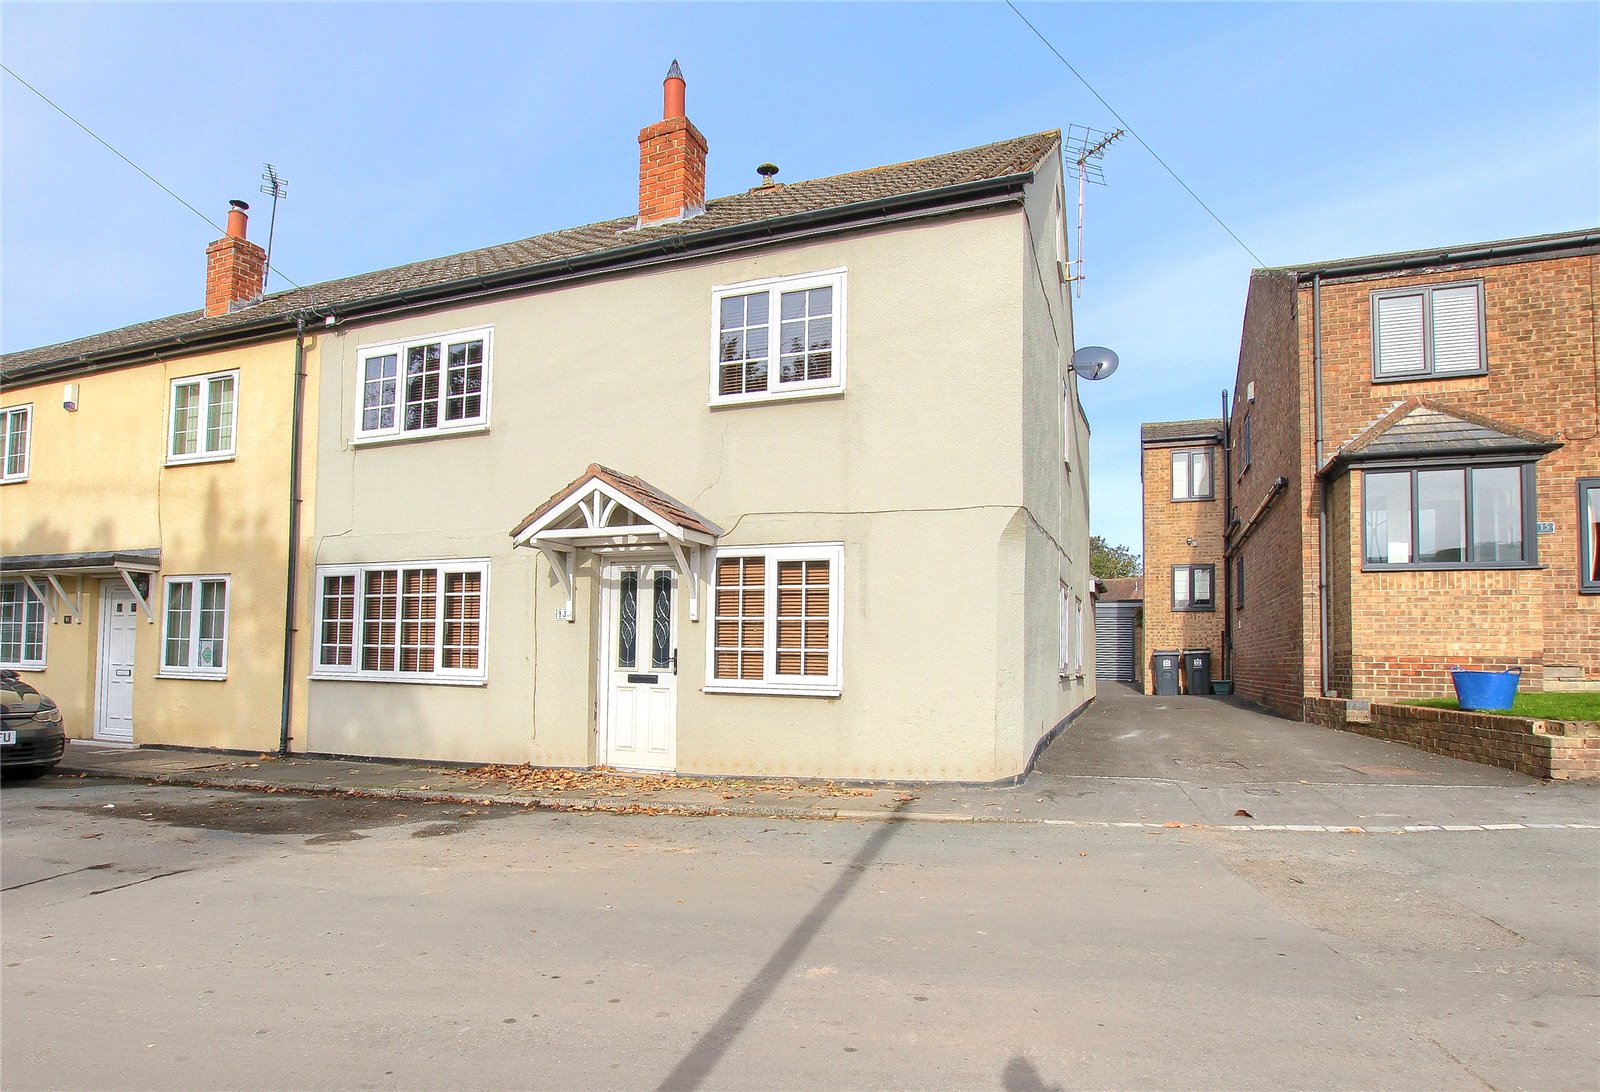 3 bed house for sale in Church View, Bishopton 1